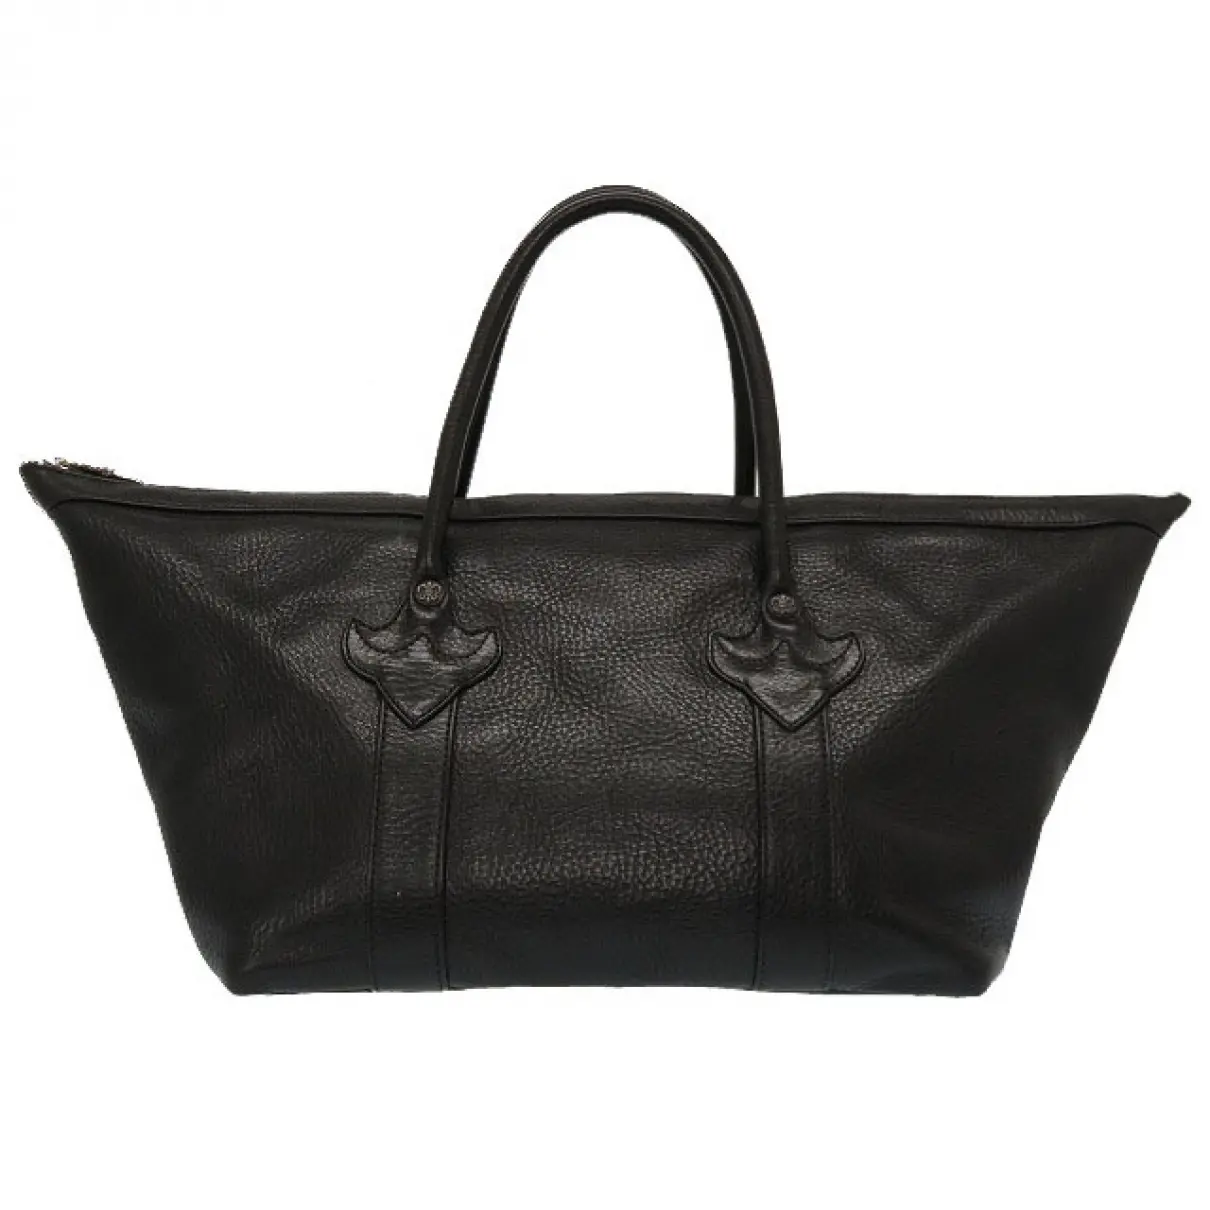 Buy Chrome Hearts Leather bag online